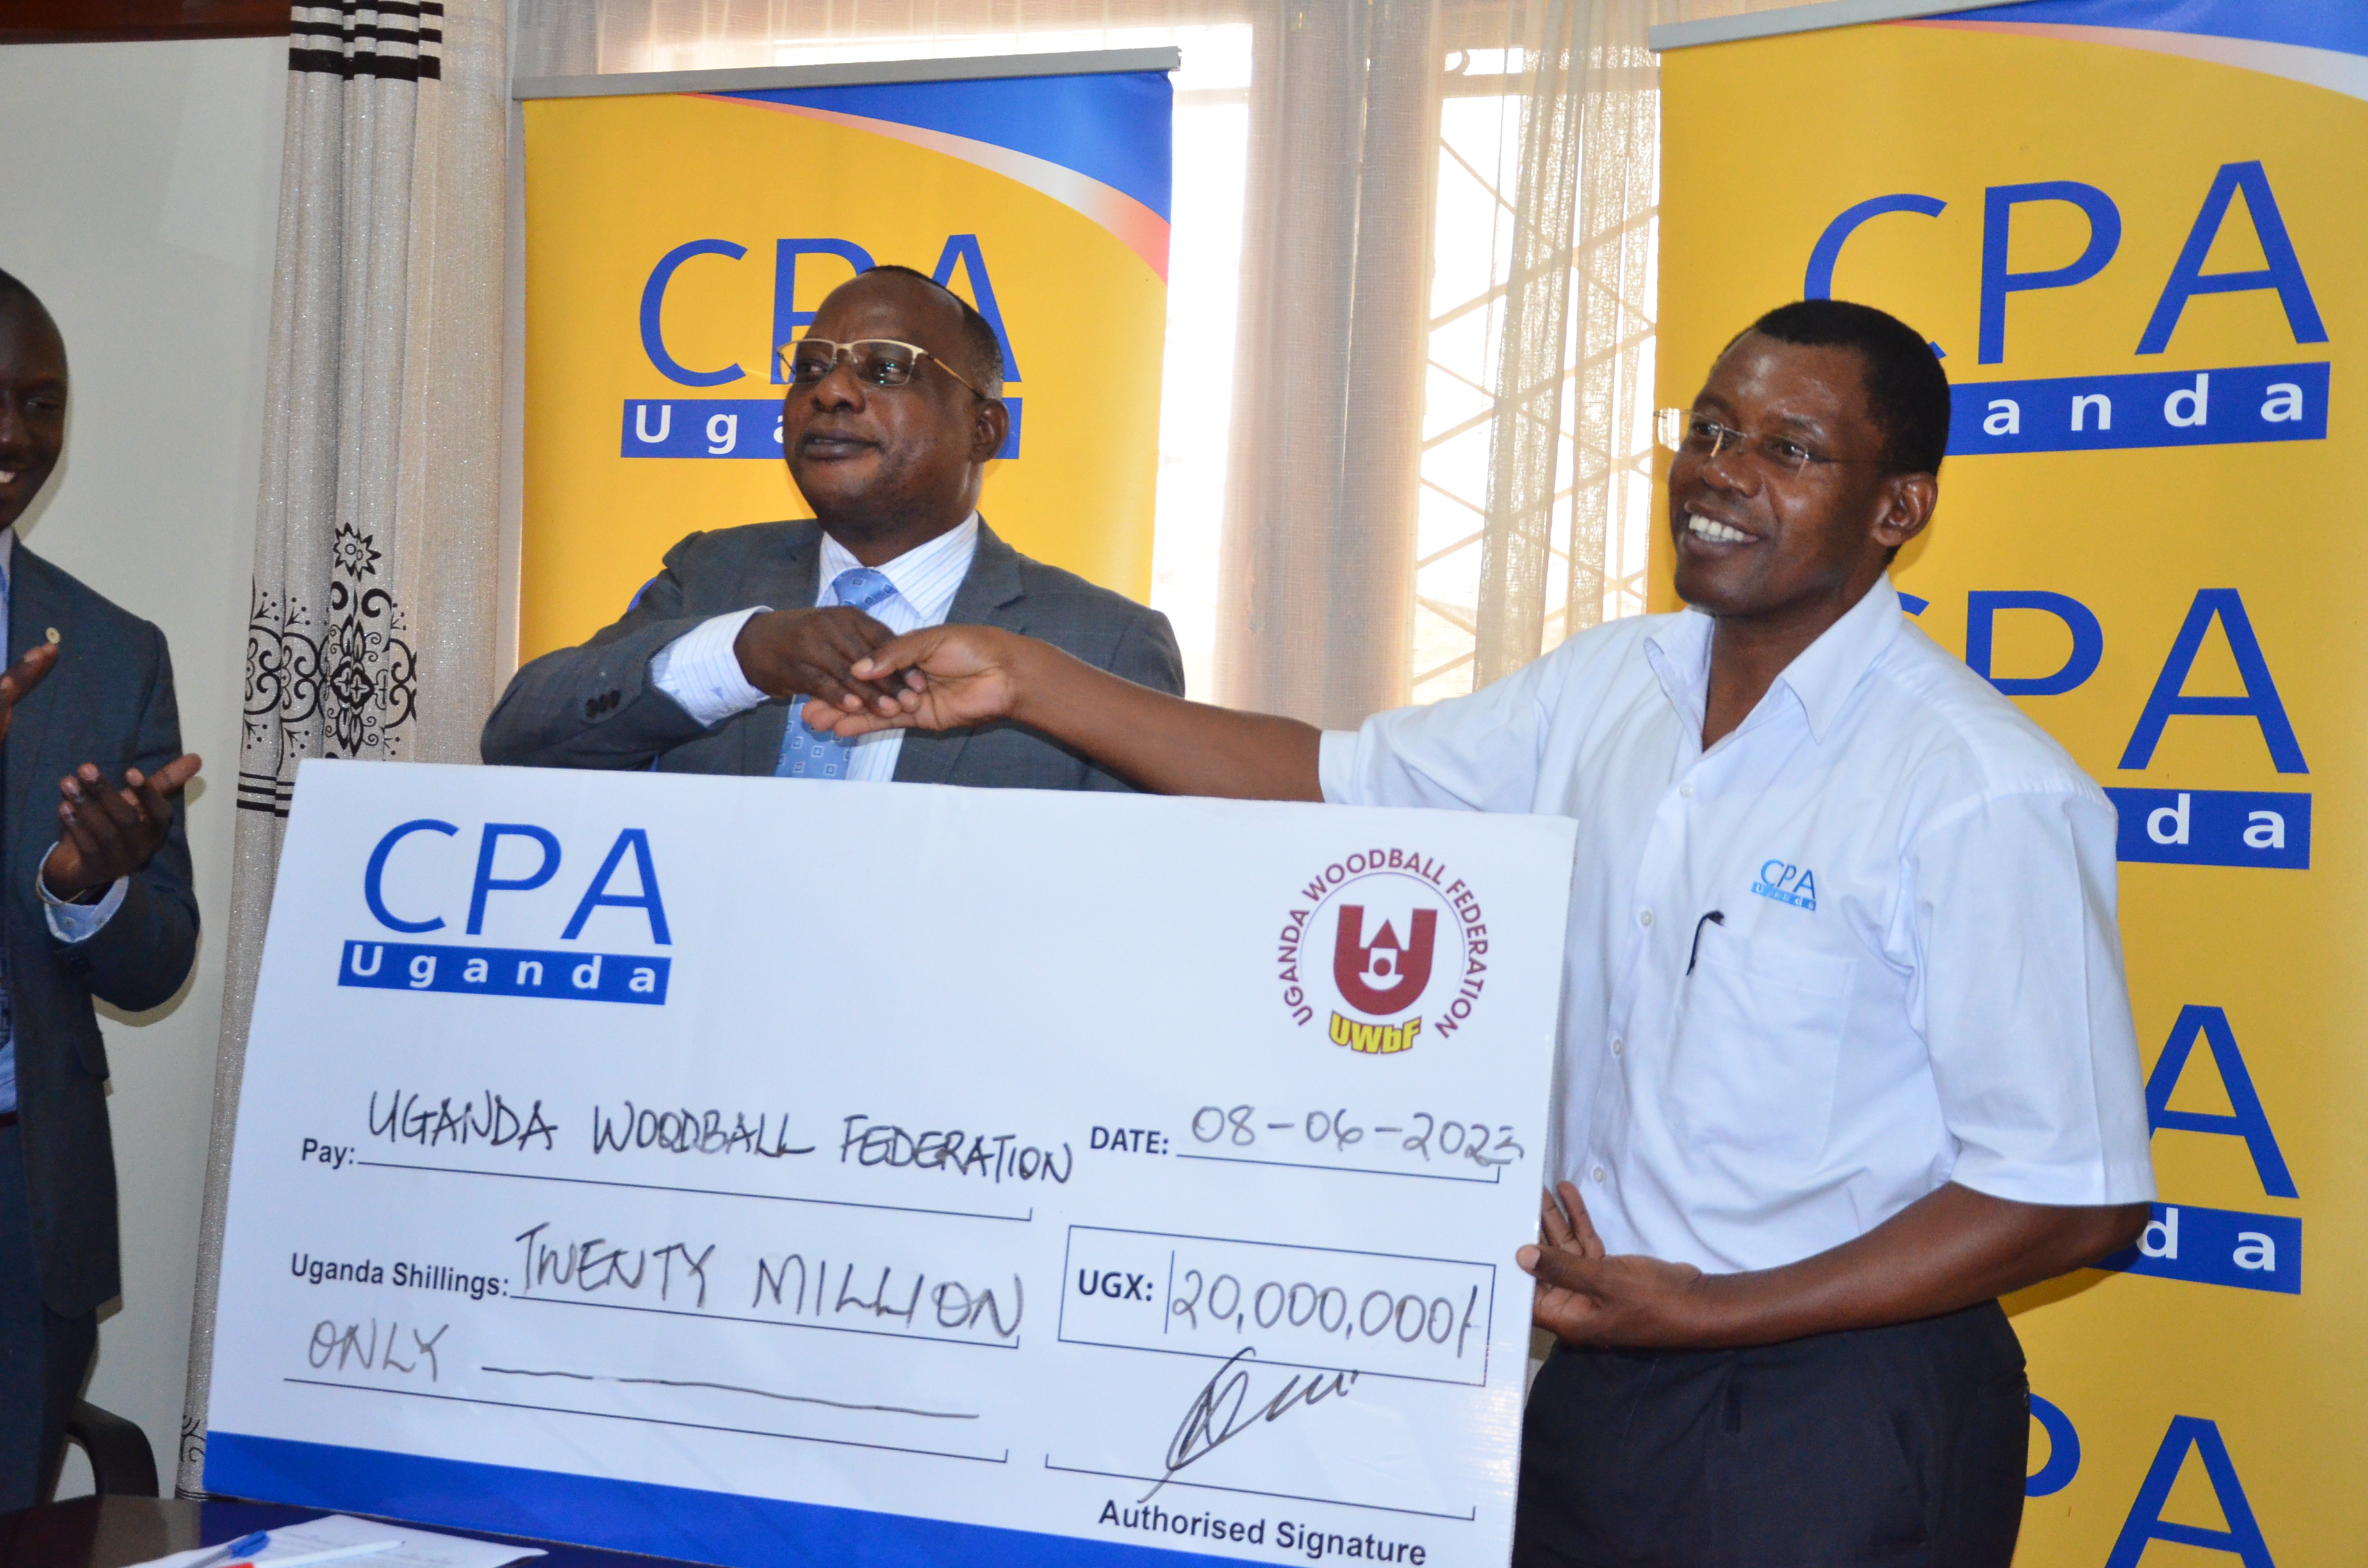 The CEO handing over the 20 miilion cheque to the President of the federation